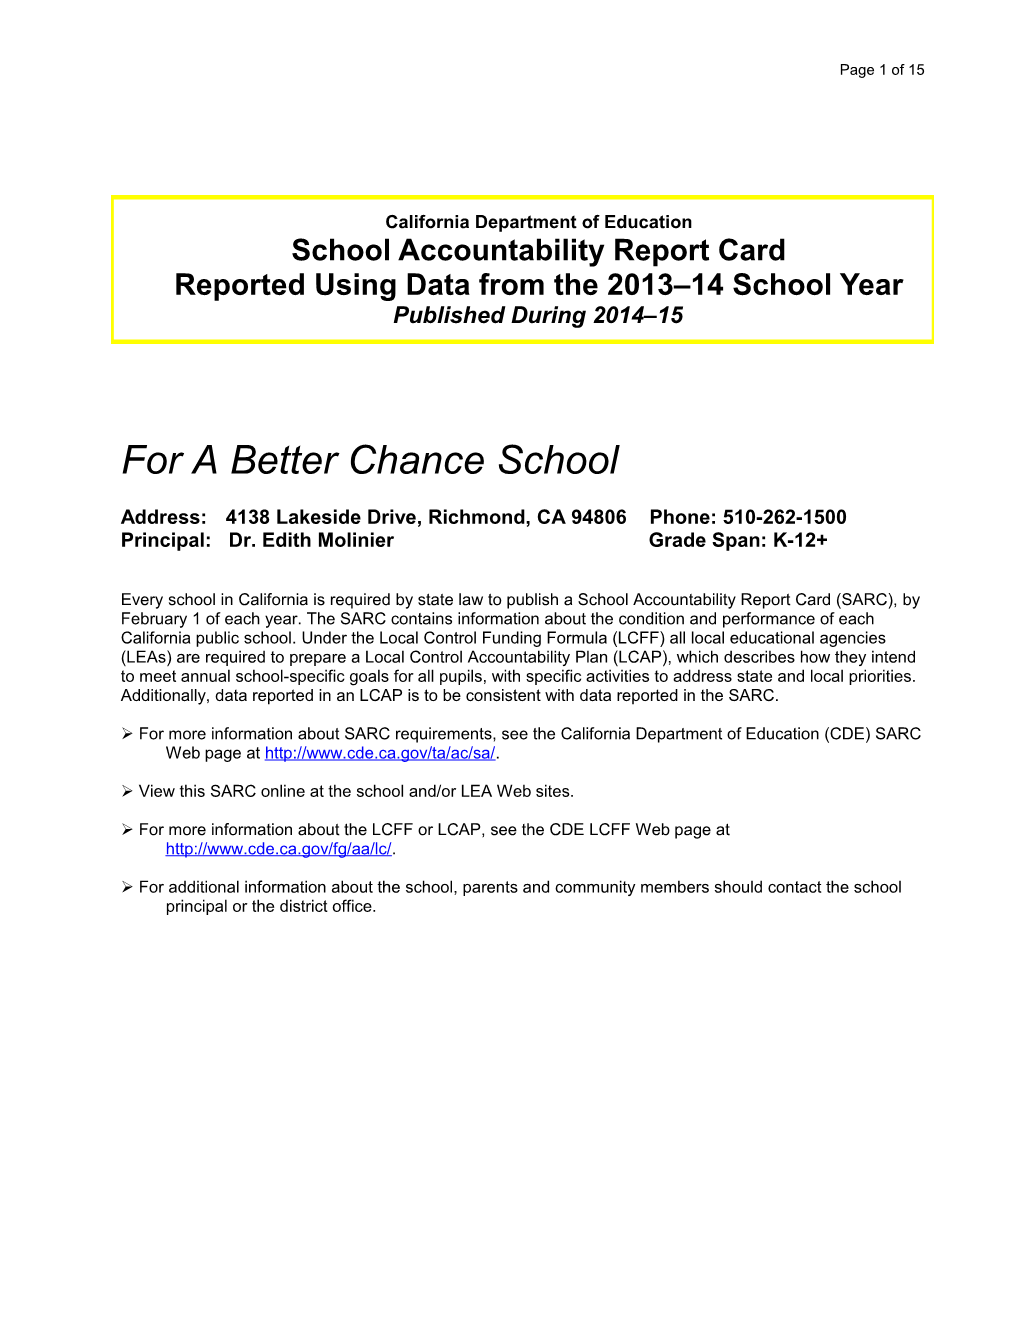 2013-14 SARC Template in Word - School Accountability Report Card (CA Dept of Education)